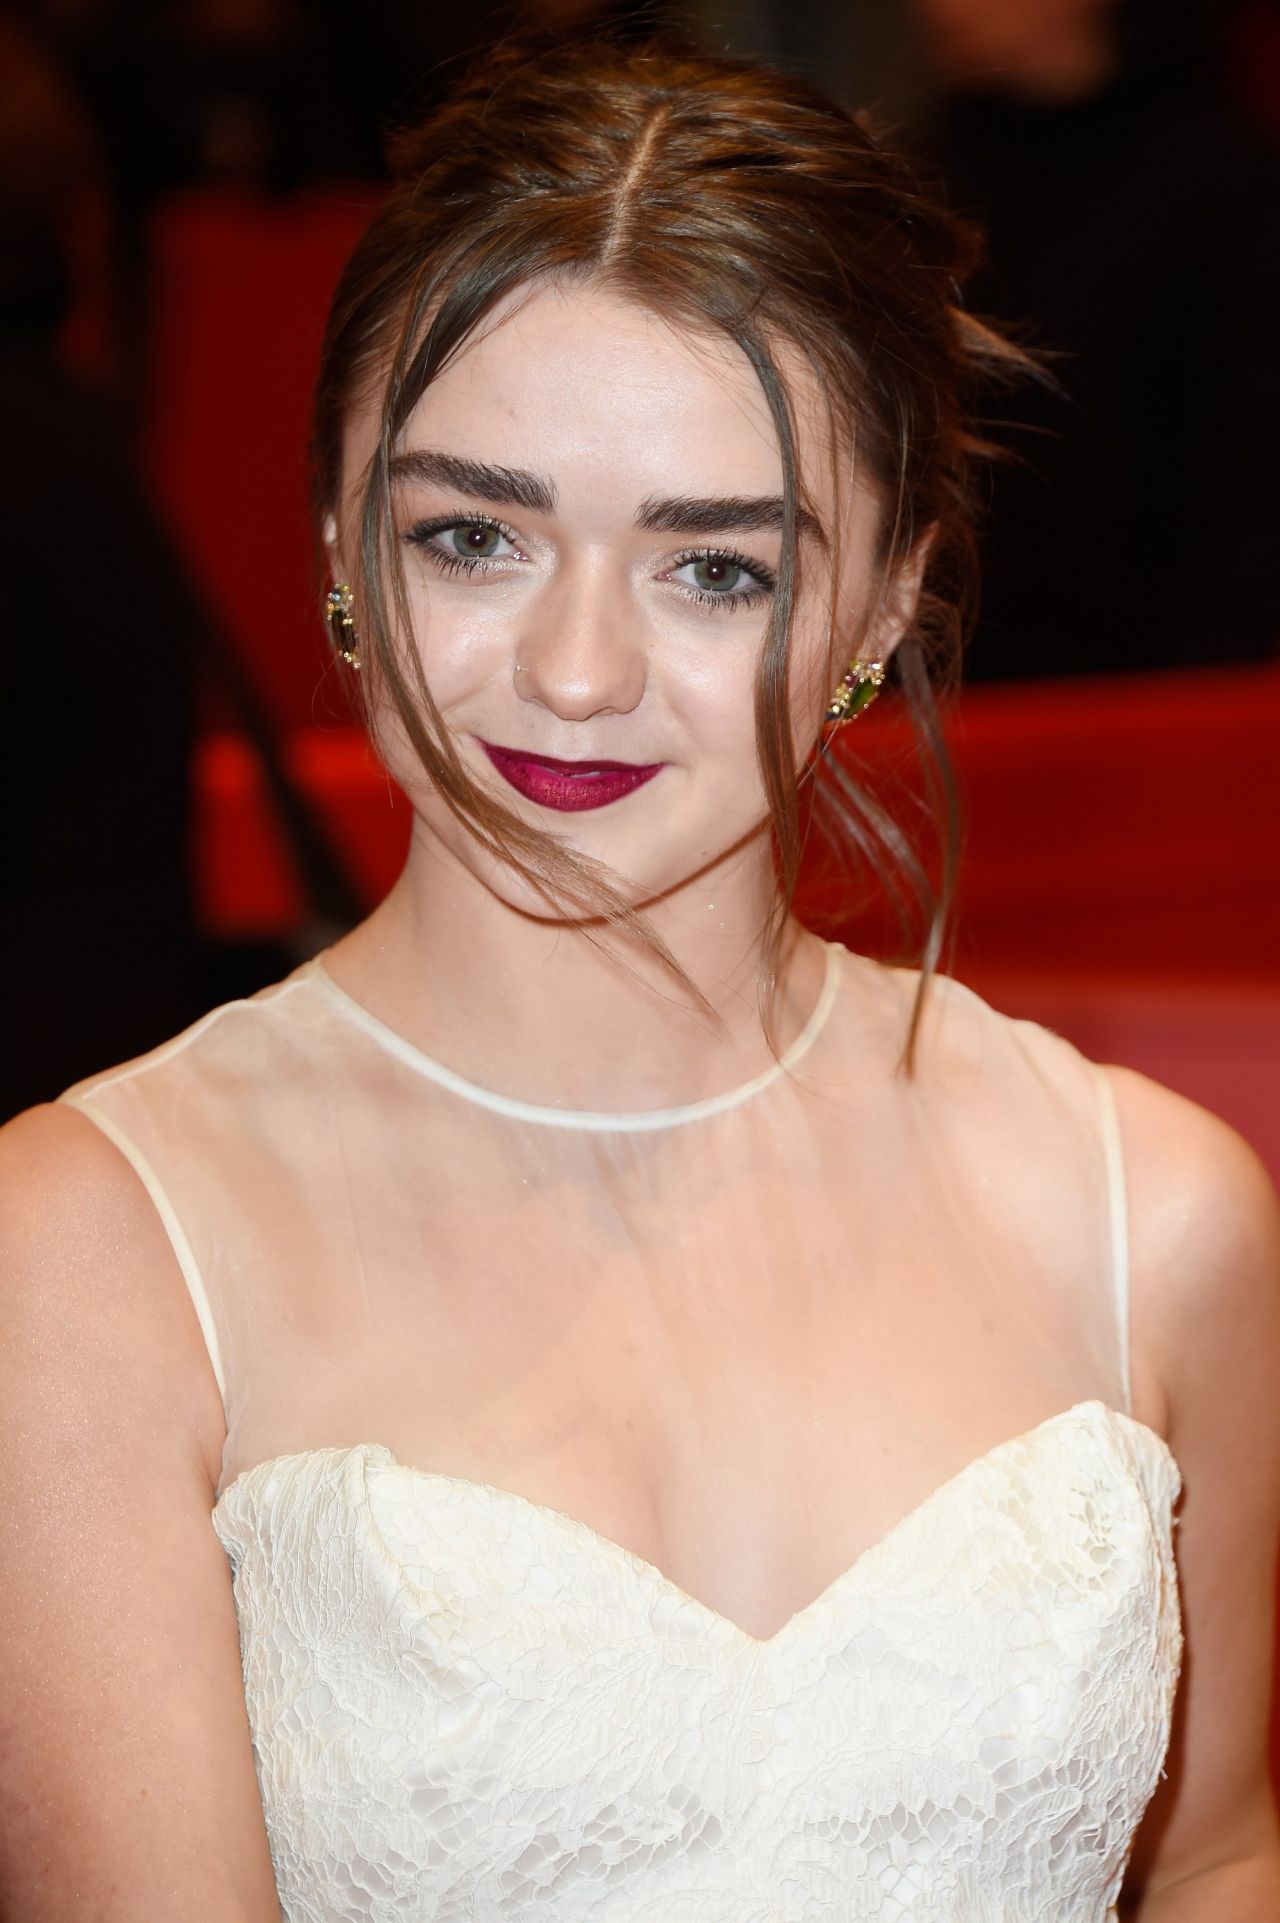 Maisie Williams - 'As We Were Dreaming' Premiere at Berlinale Film Festival